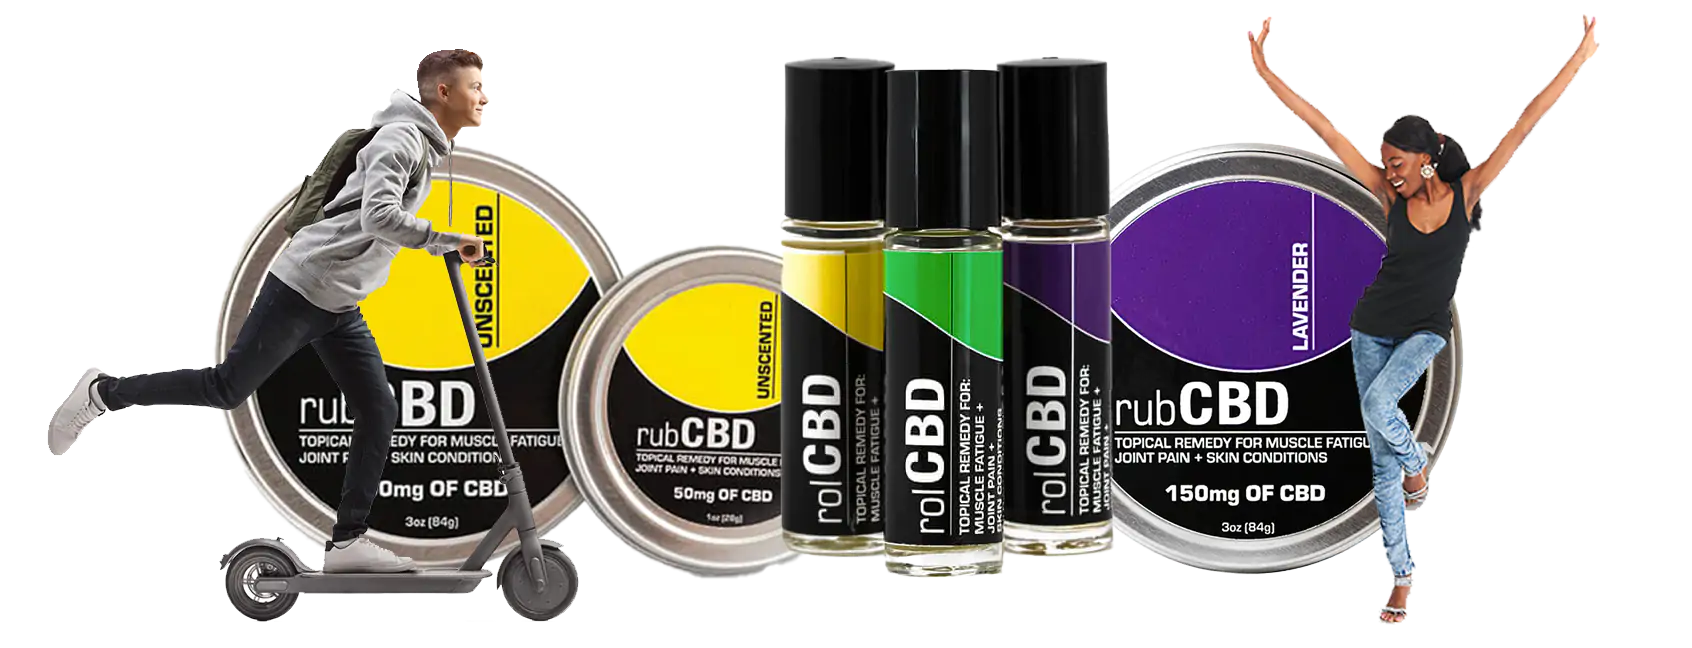 CBD Topicals and Rubs